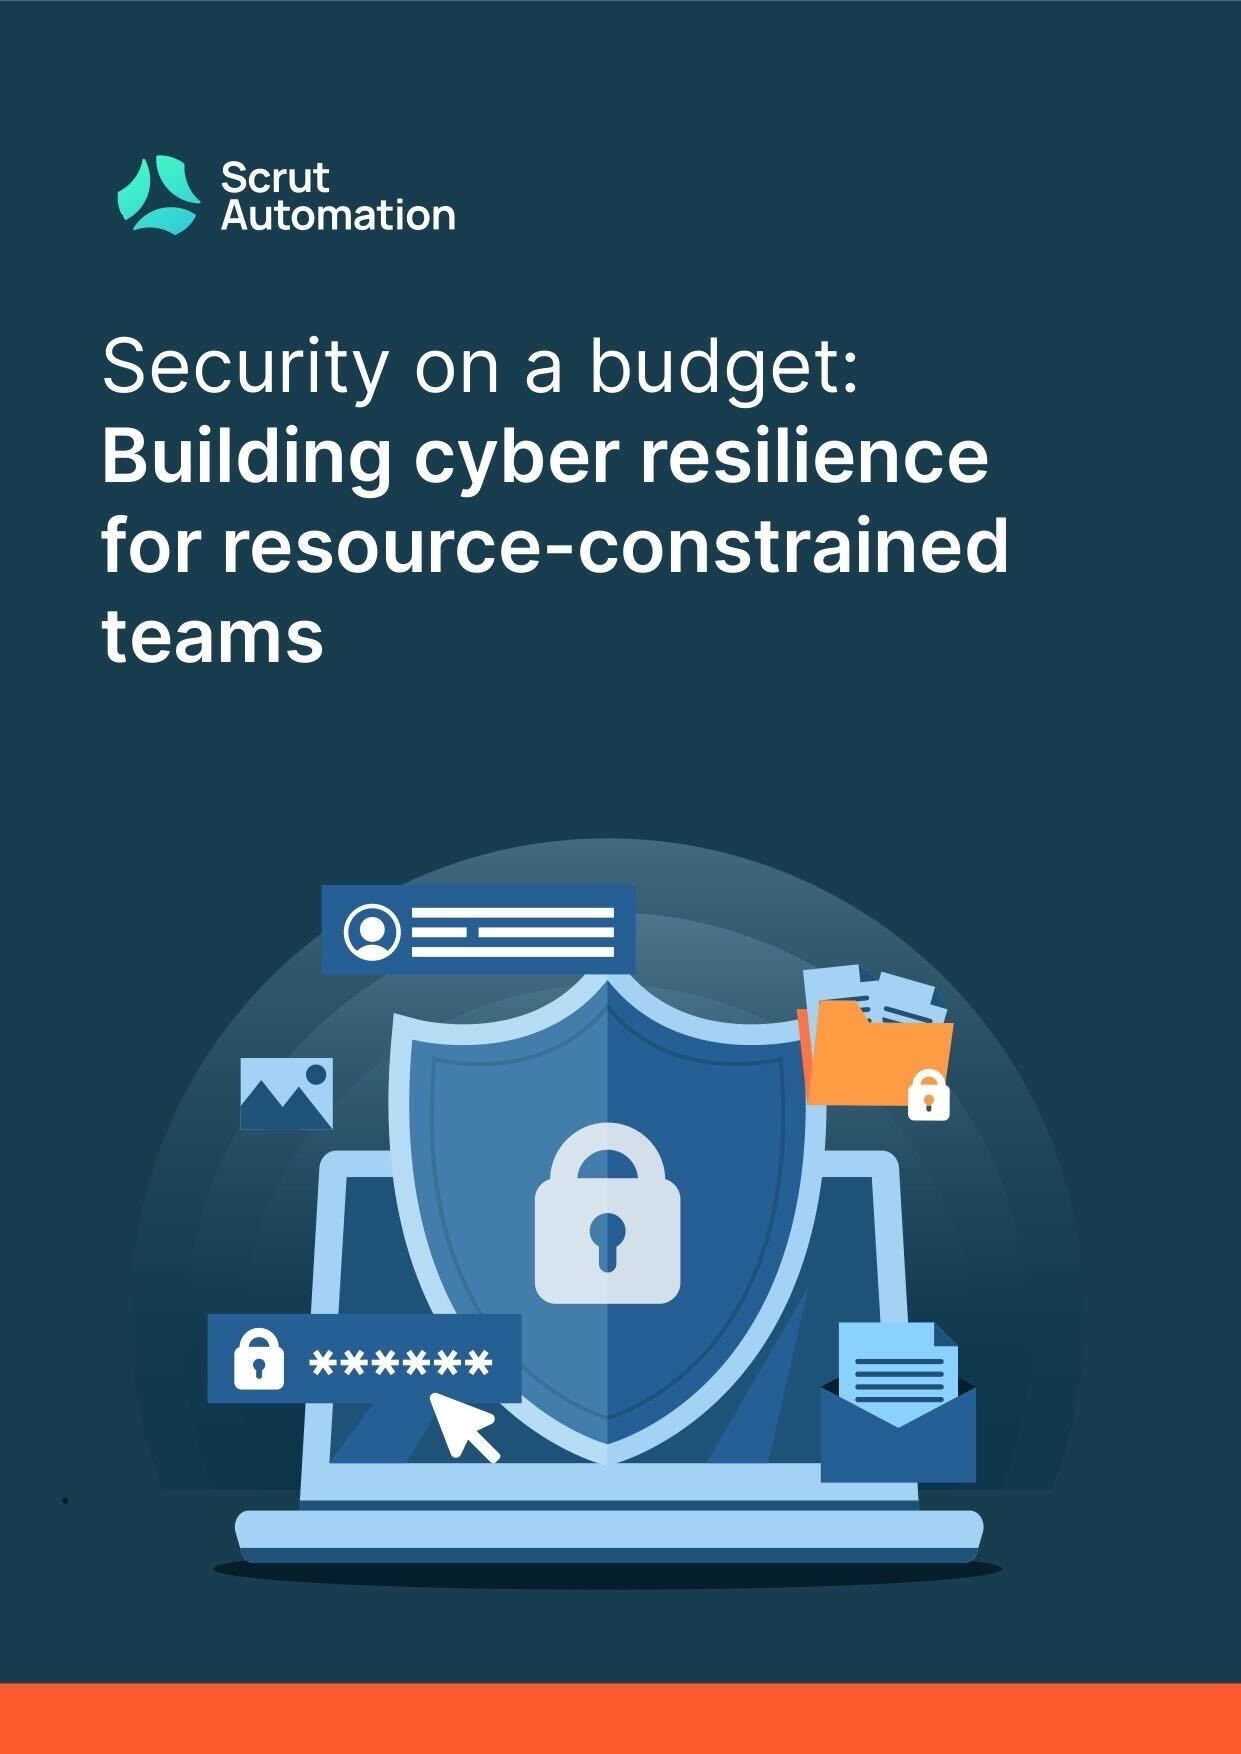 Security on a Budget: Building Cyber Resilience for Resource-Constrained Teams